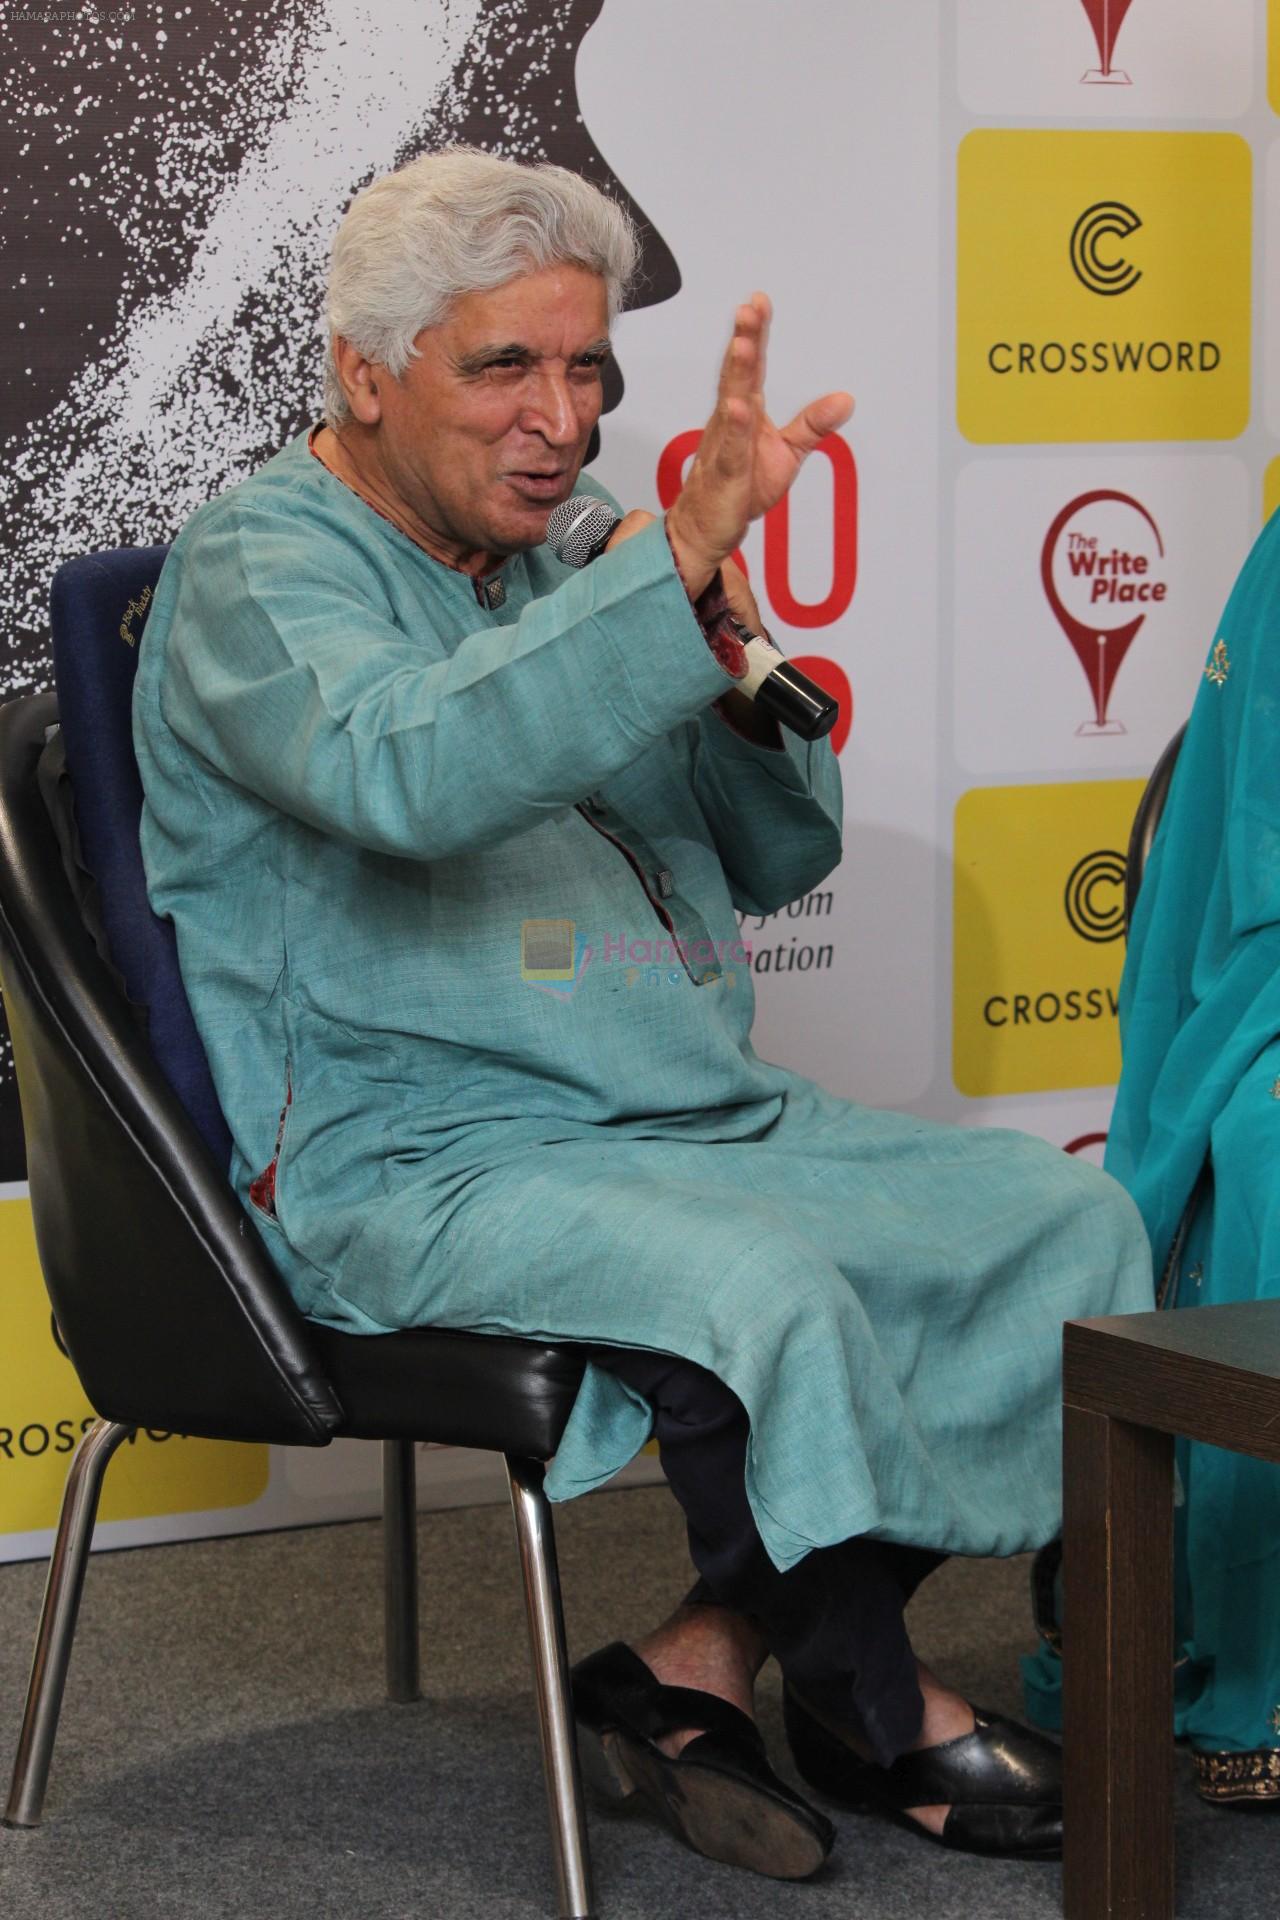 Javed Akhtar At The Launch Of Author Sonal Sonkavde 2nd Book 'sO WHAT_ on 10th June 2019